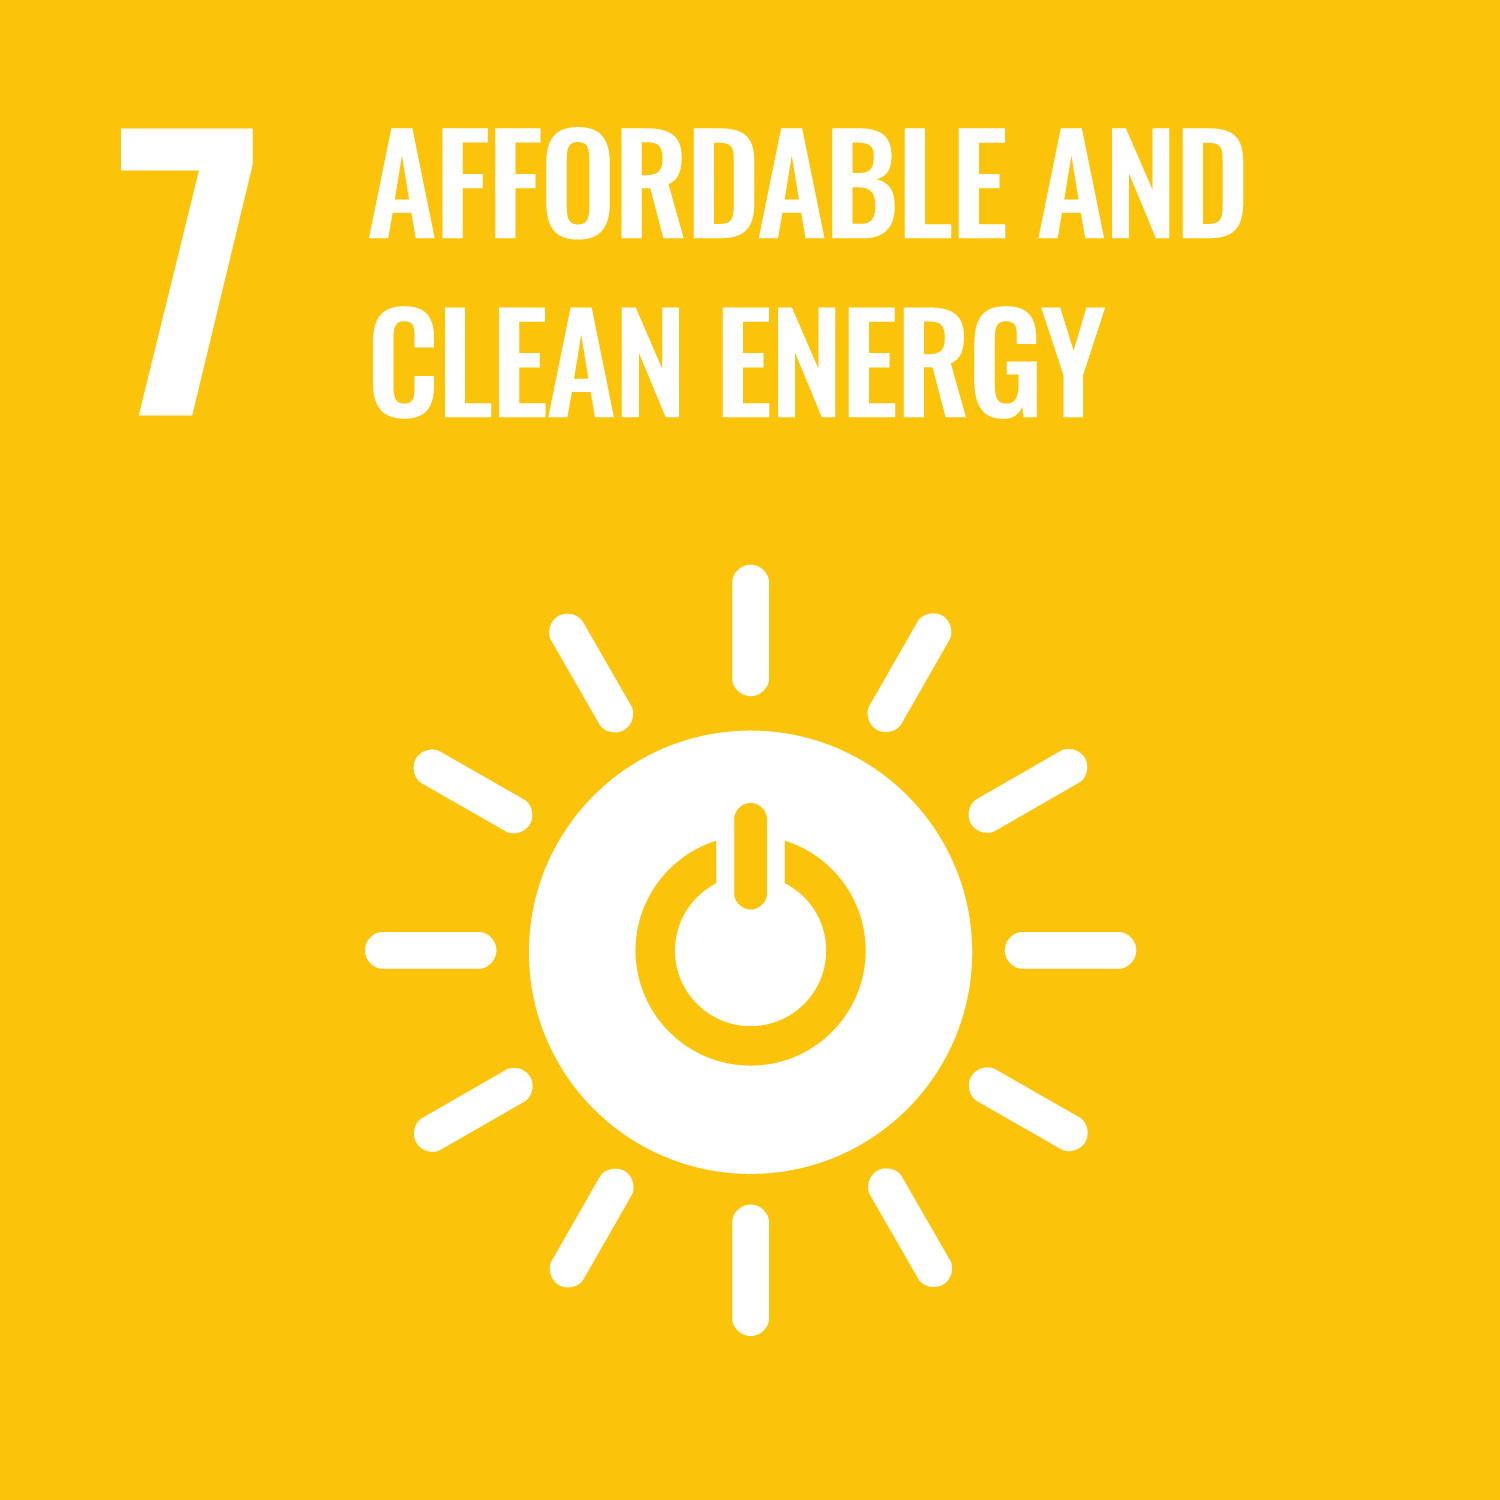 United Nation's 17 Sustainable Development Goals: Goal Number 7: Affordable and Clean Energy